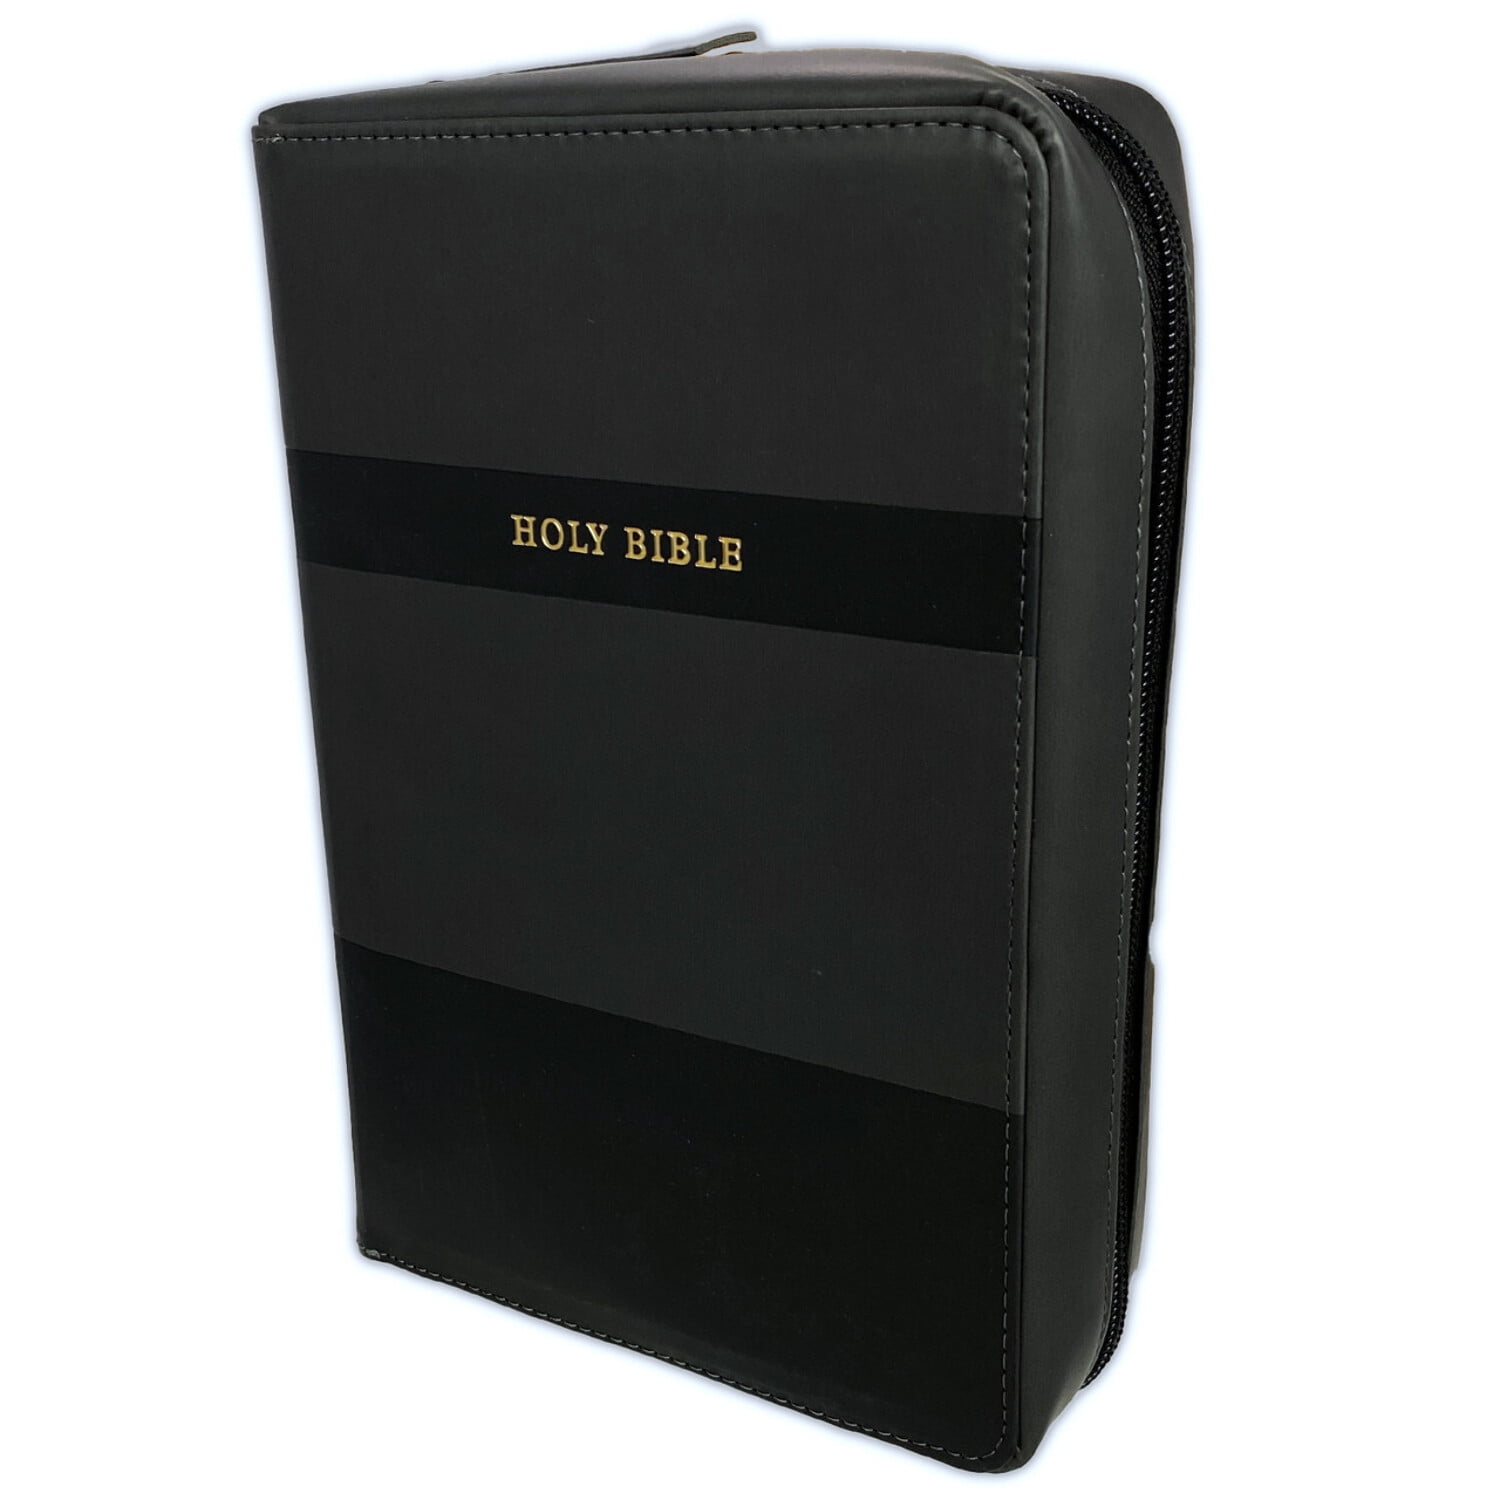 KJV Large Print Zippered Bible with Organizer Cover, black and gray ...